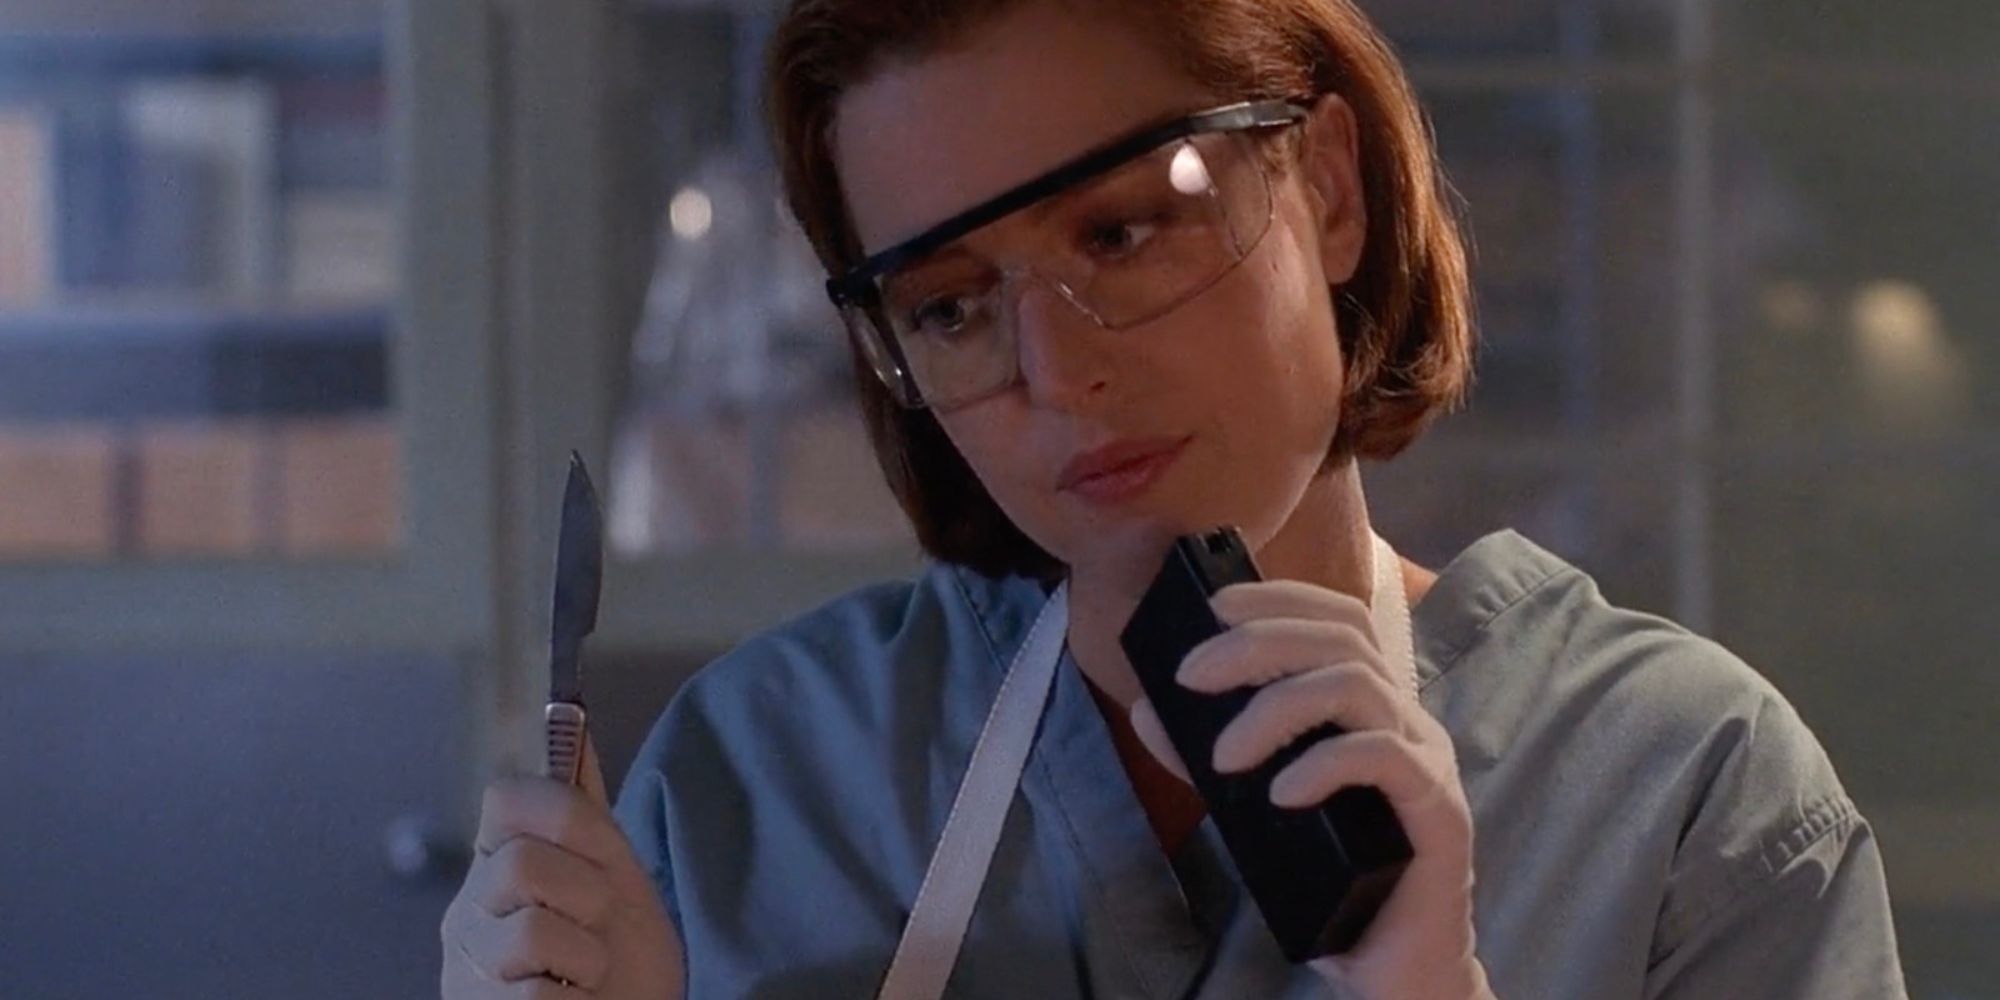 Dana Scully holds a scalpel and tape recorder in a science lab